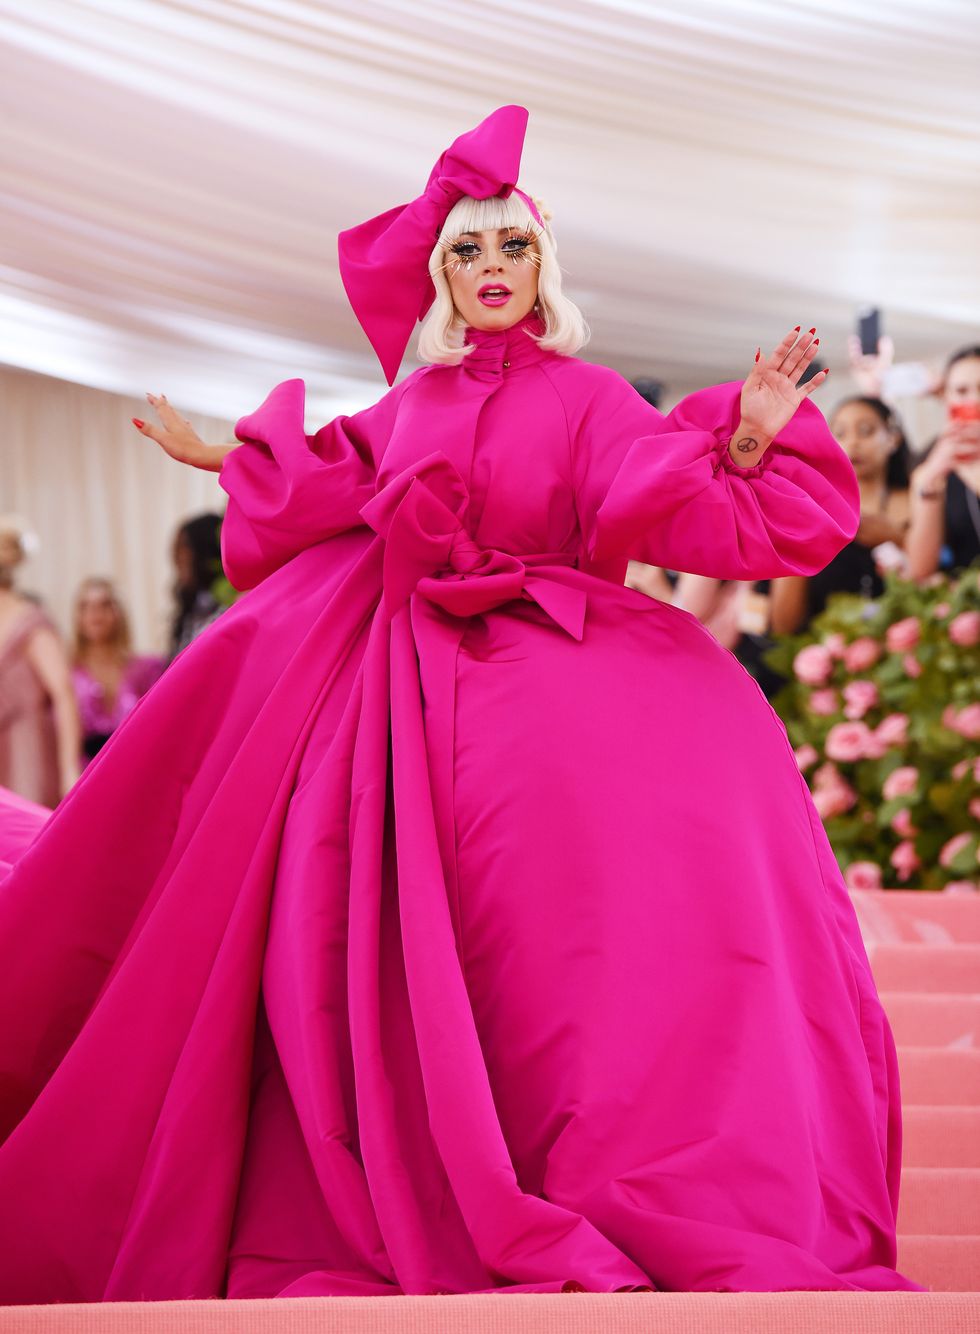 Met Gala 2019 - The Met Gala Red Carpet Dresses And Gowns That Made The  Best Dressed List